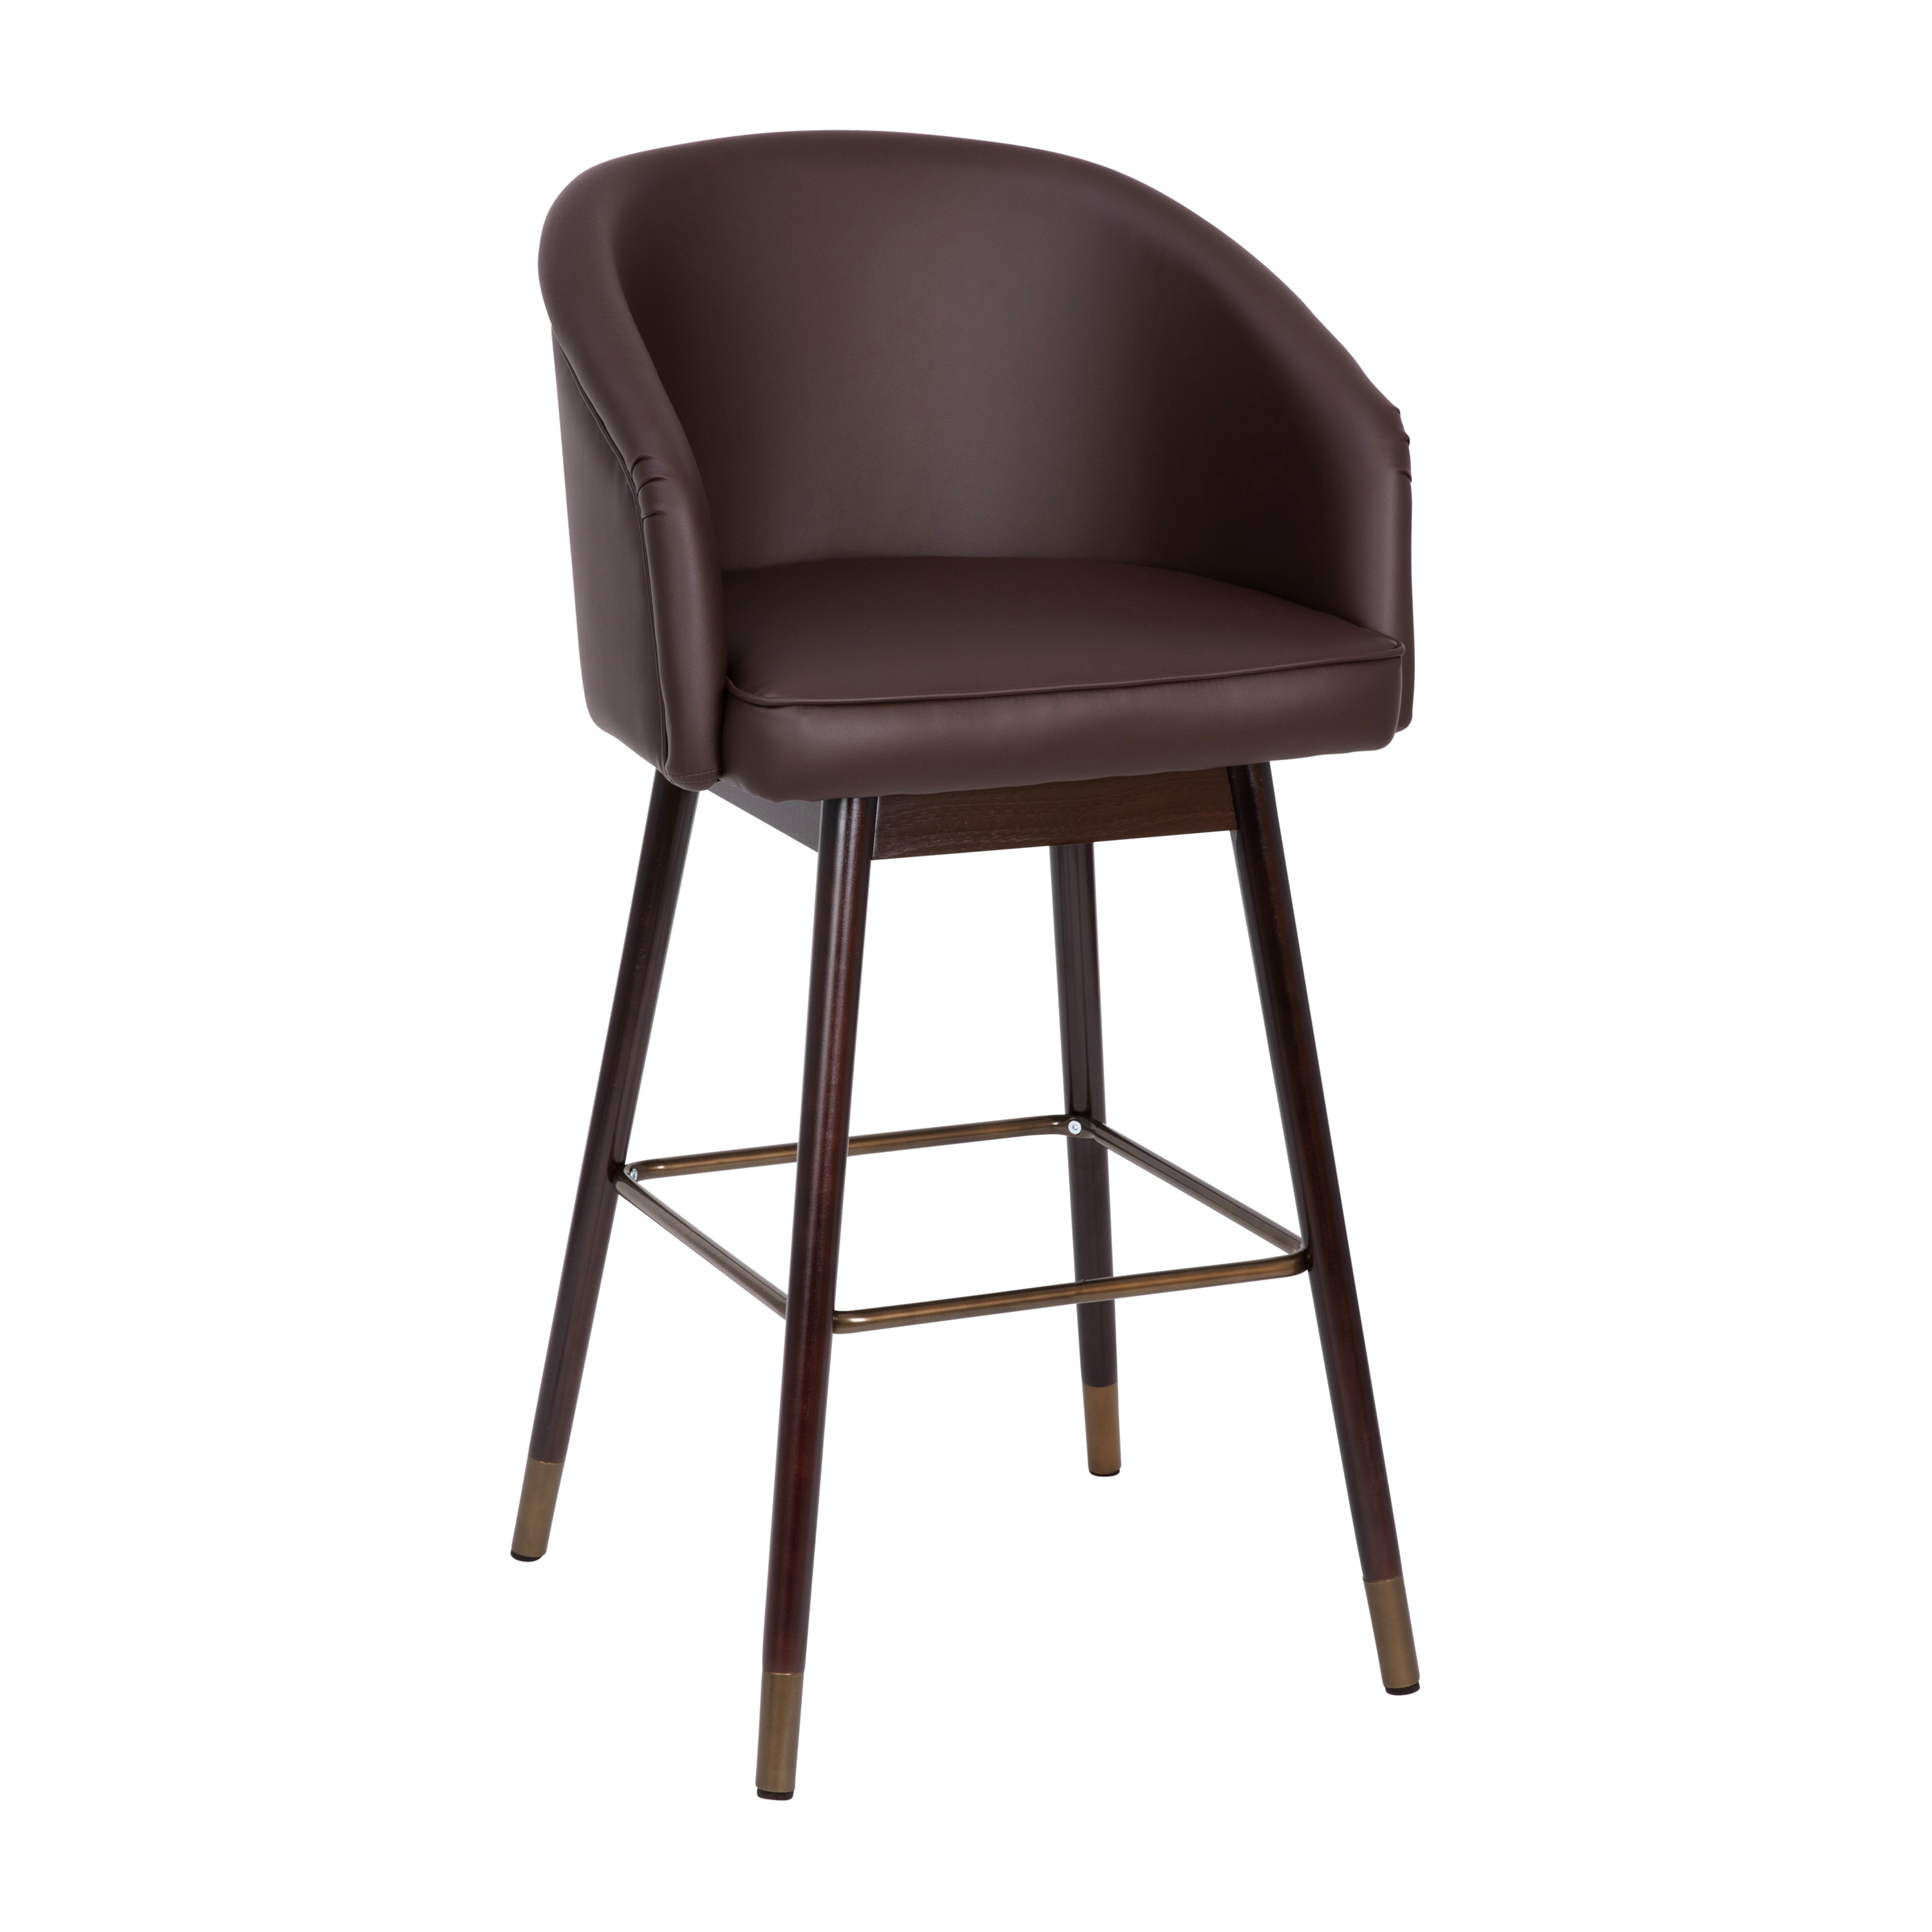 Flash Furniture AY-1928-30-BR-GG Mid-Back Modern 30" Bar Stool with Beechwood Legs and Curved Back, Brown LeatherSoft/Muted Bronze Accents